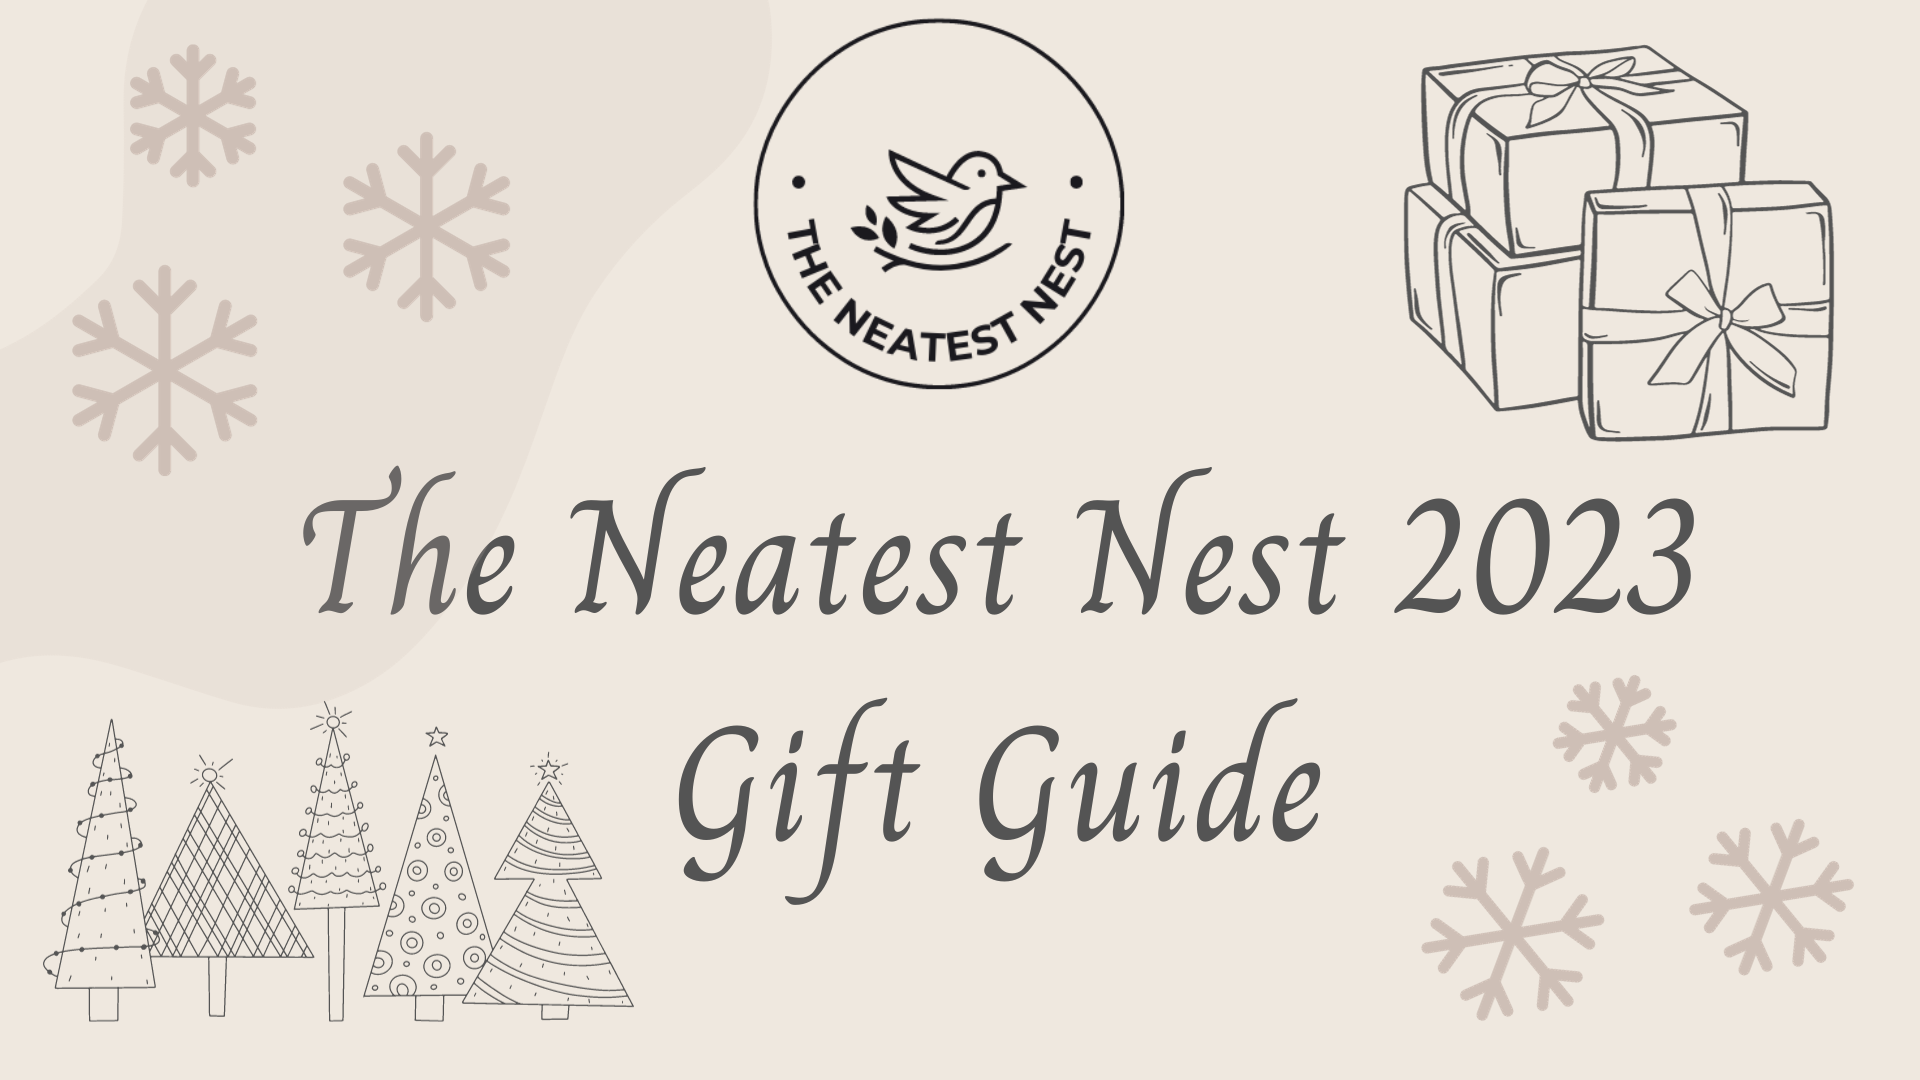 The Neatest Nest 2023 Gift Guide